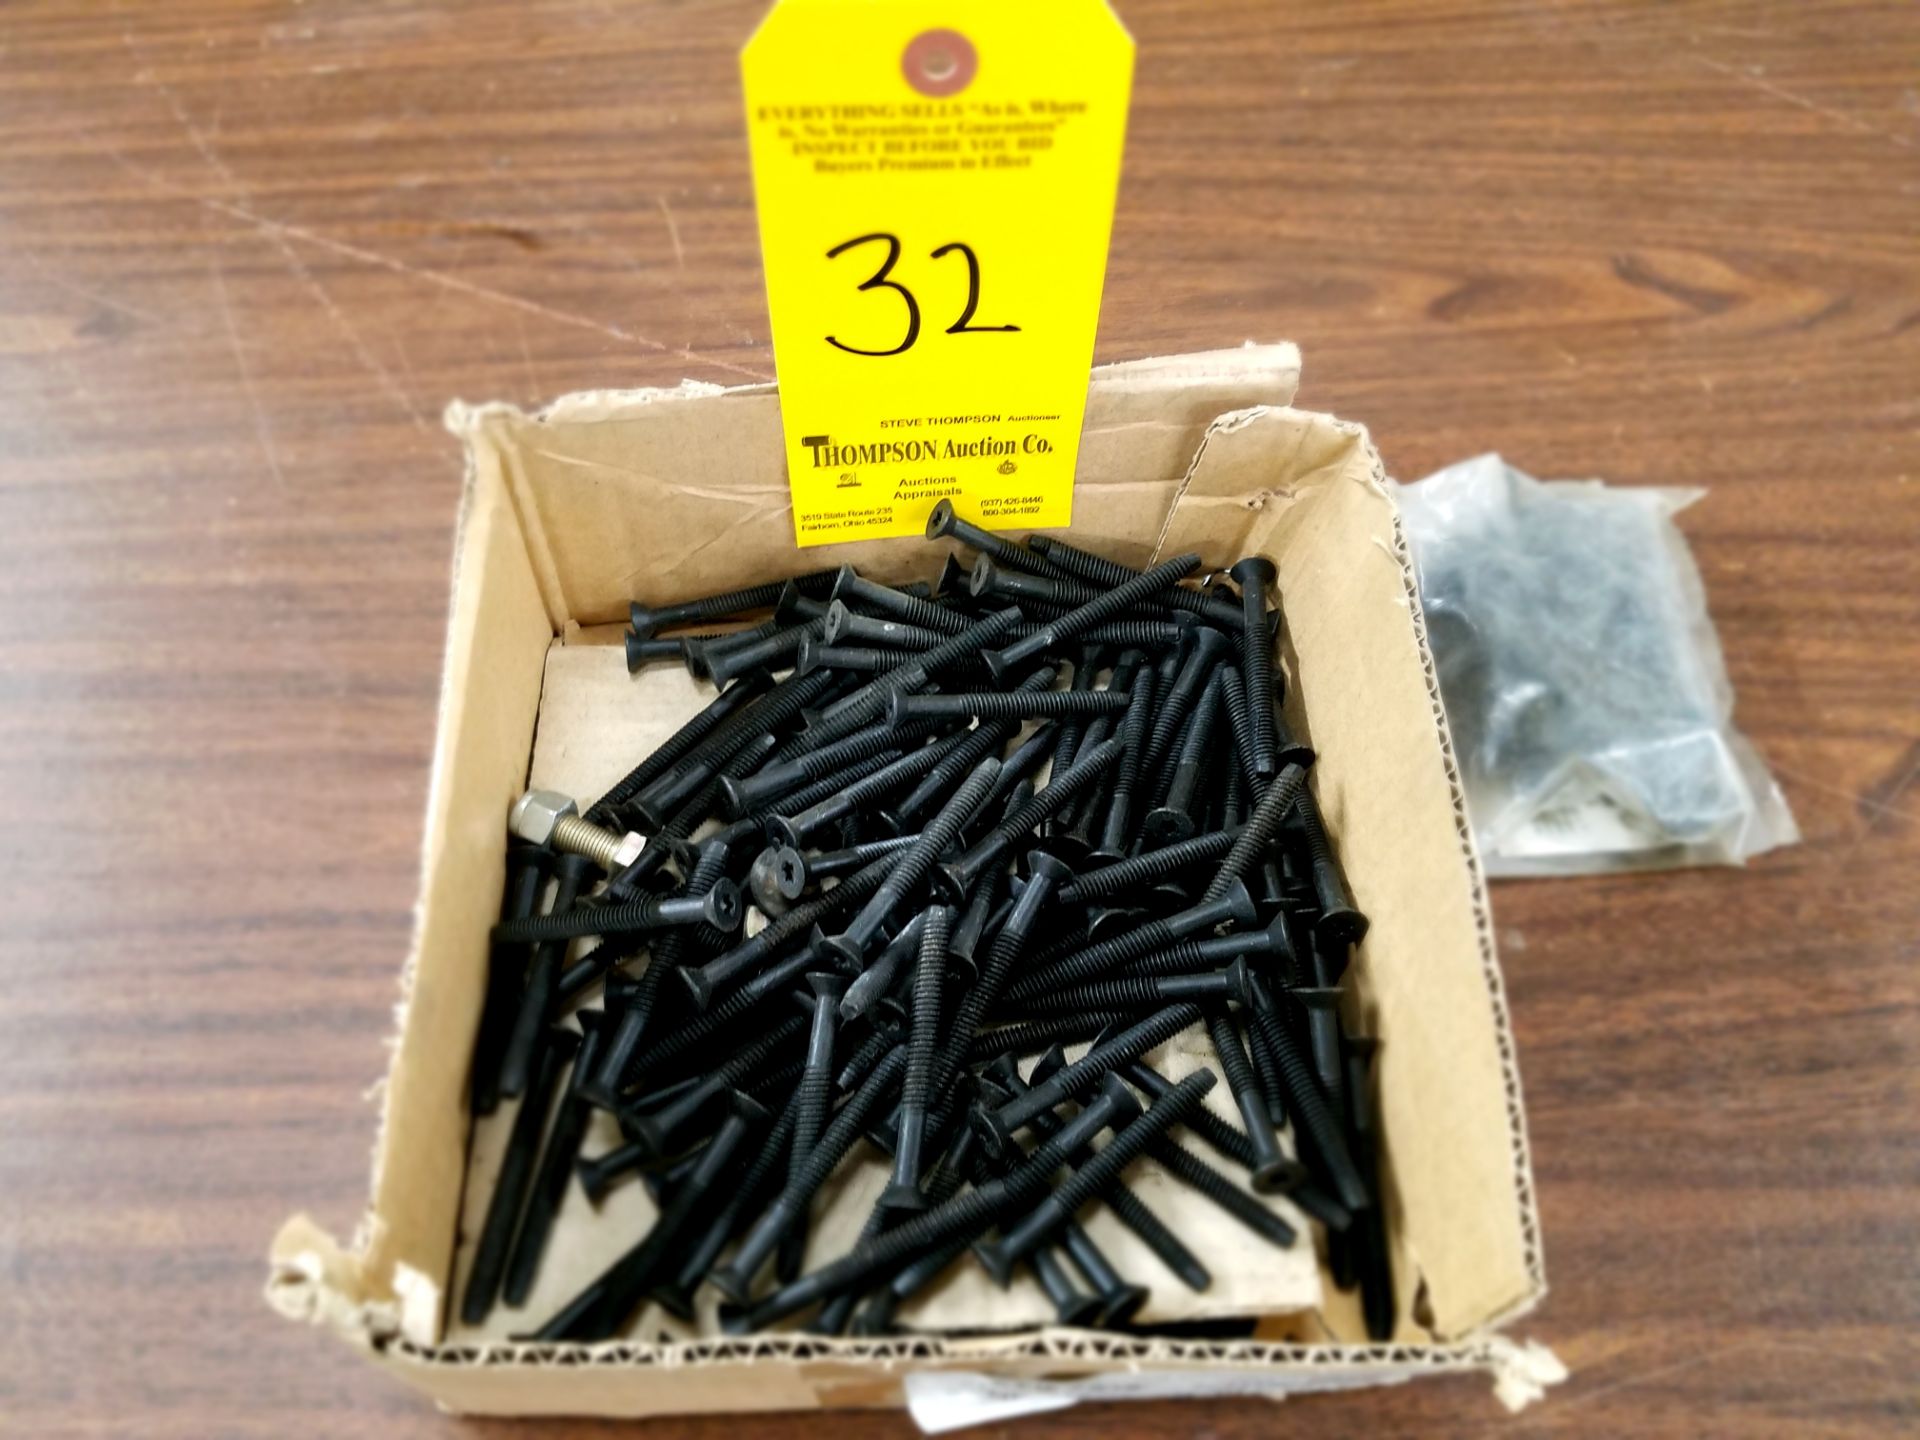 Lot, Trailer Bolts and Screws